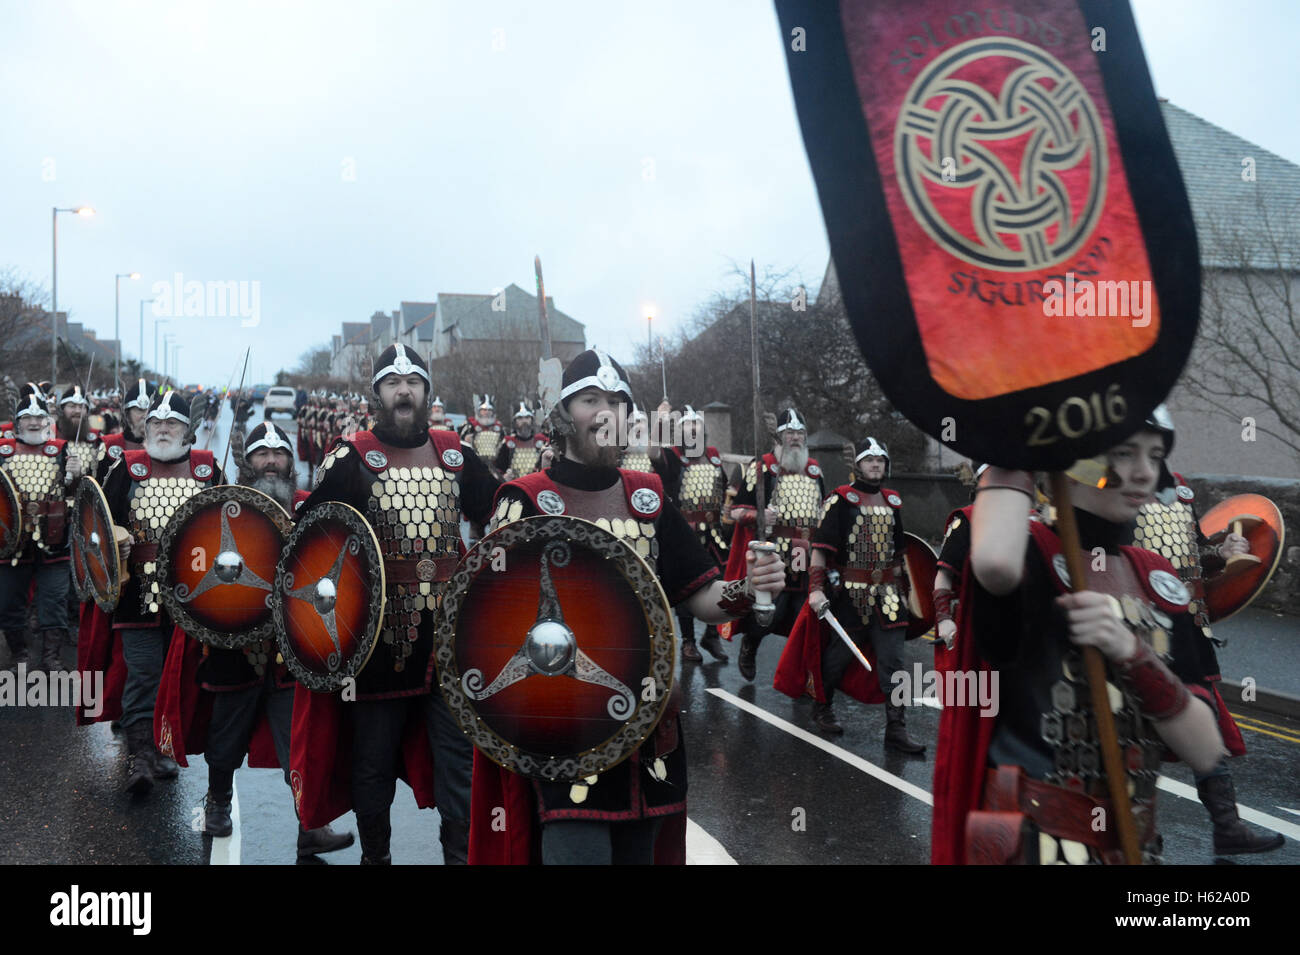 Up Helly Aa fire festival 2016 in Lerwick Shetland Islands held on the last Tuesday in January Stock Photo